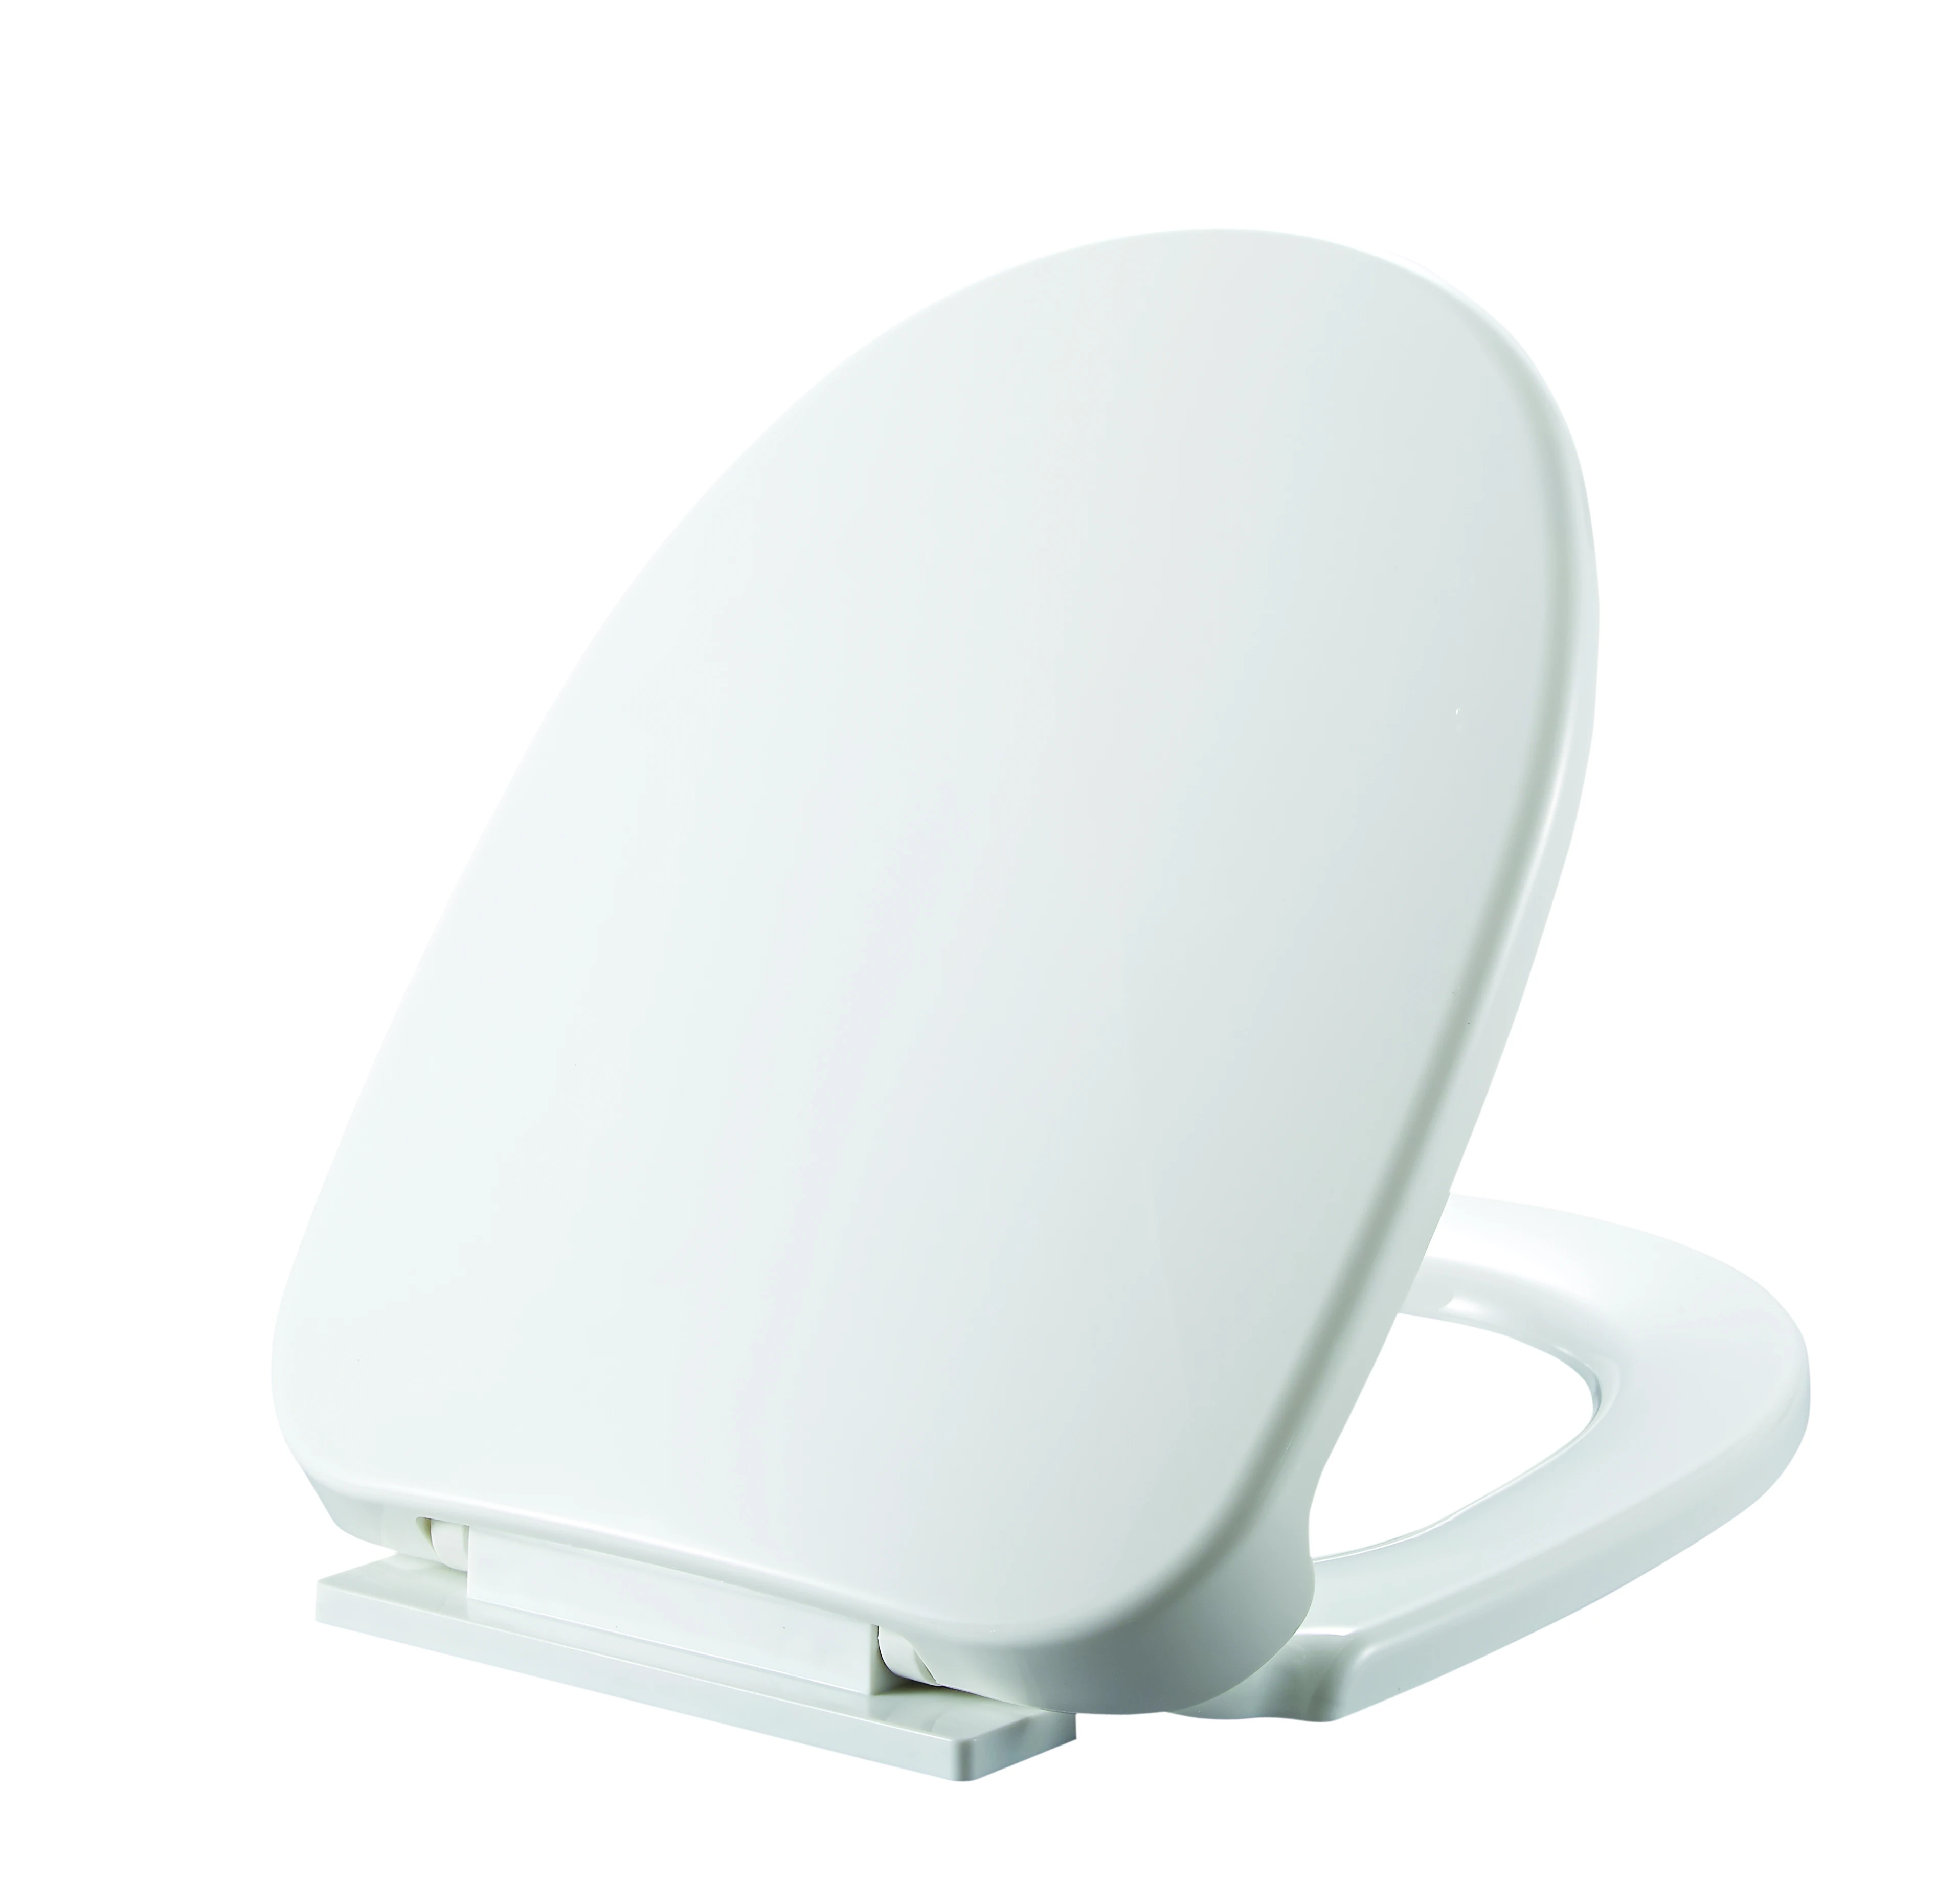 High quality PP material soft closed toilet seat cover